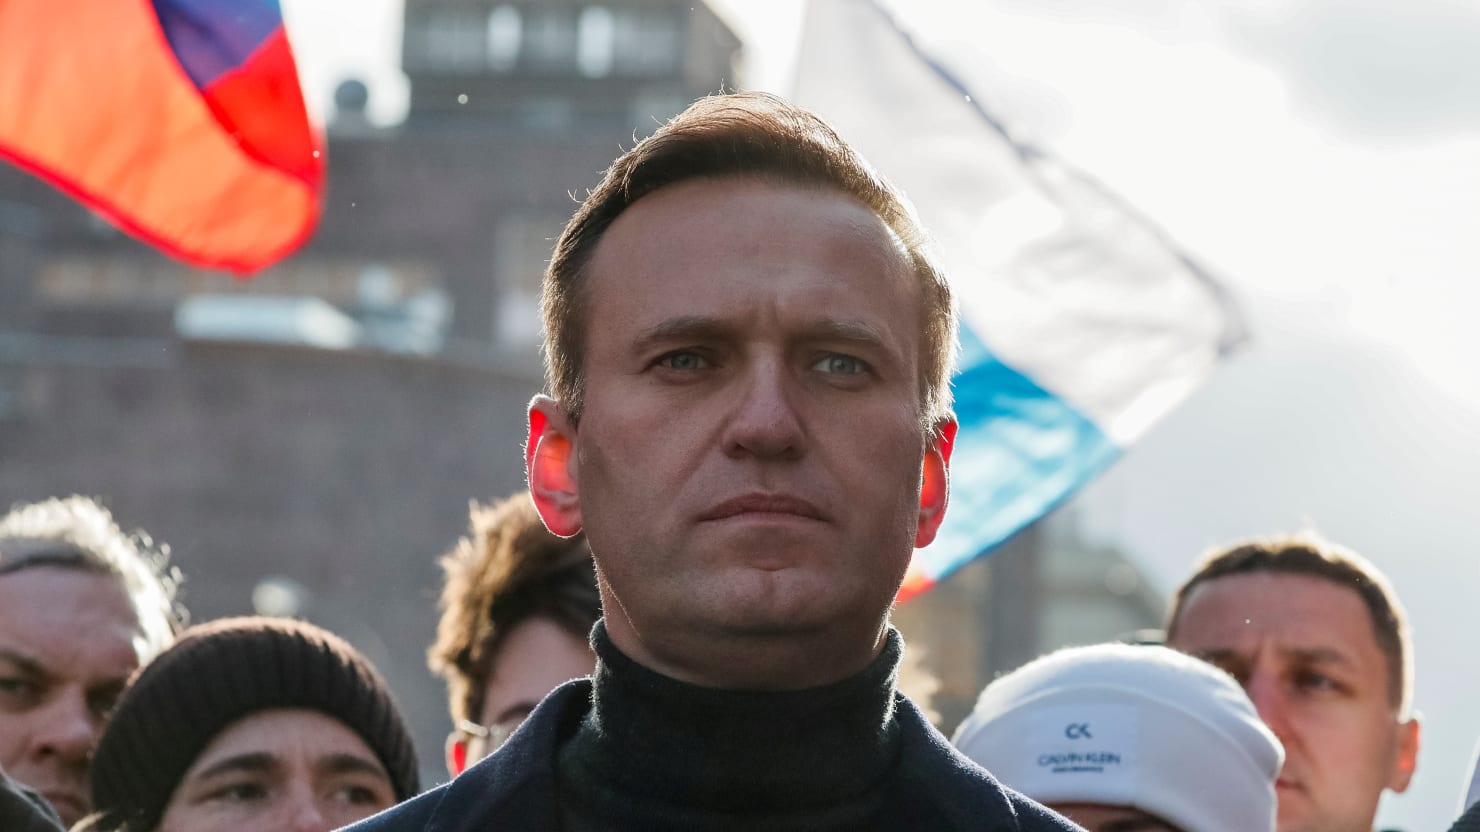 Navalny tricked Russian FSB officer into confessing to poisoned panties in phone call